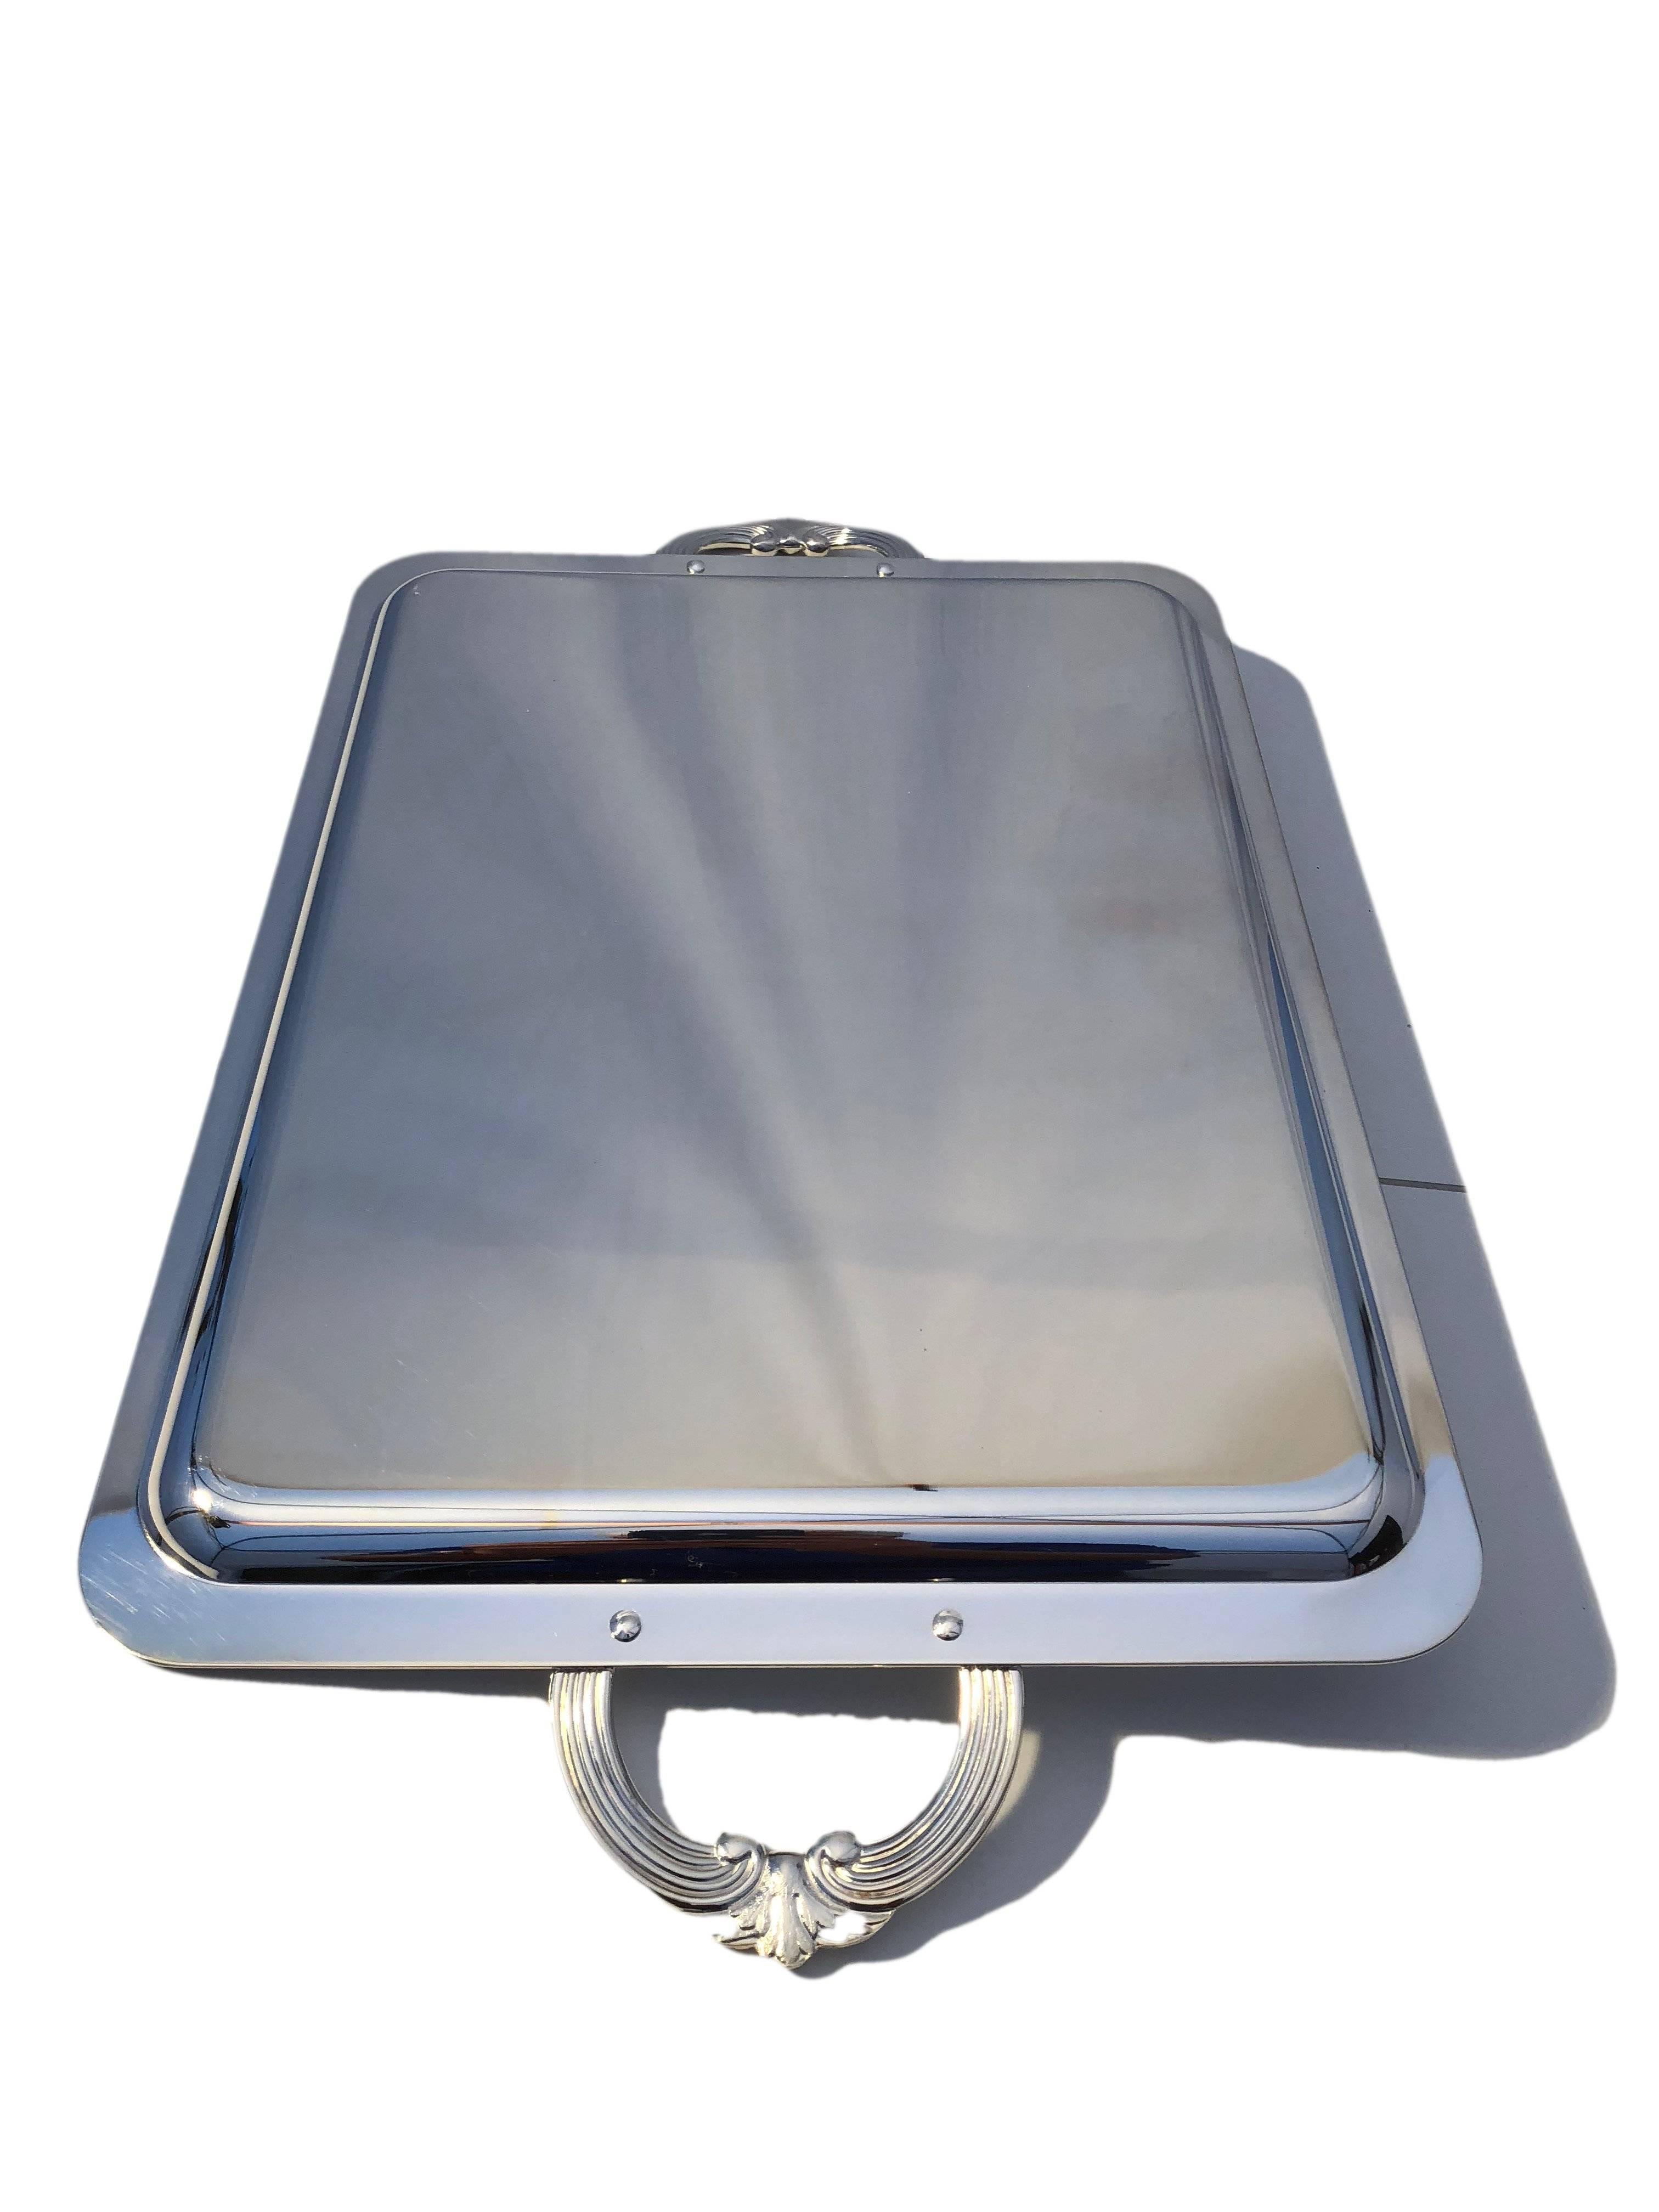 French Christofle Silver Plated Rectangular Tray Carnavalet For Sale